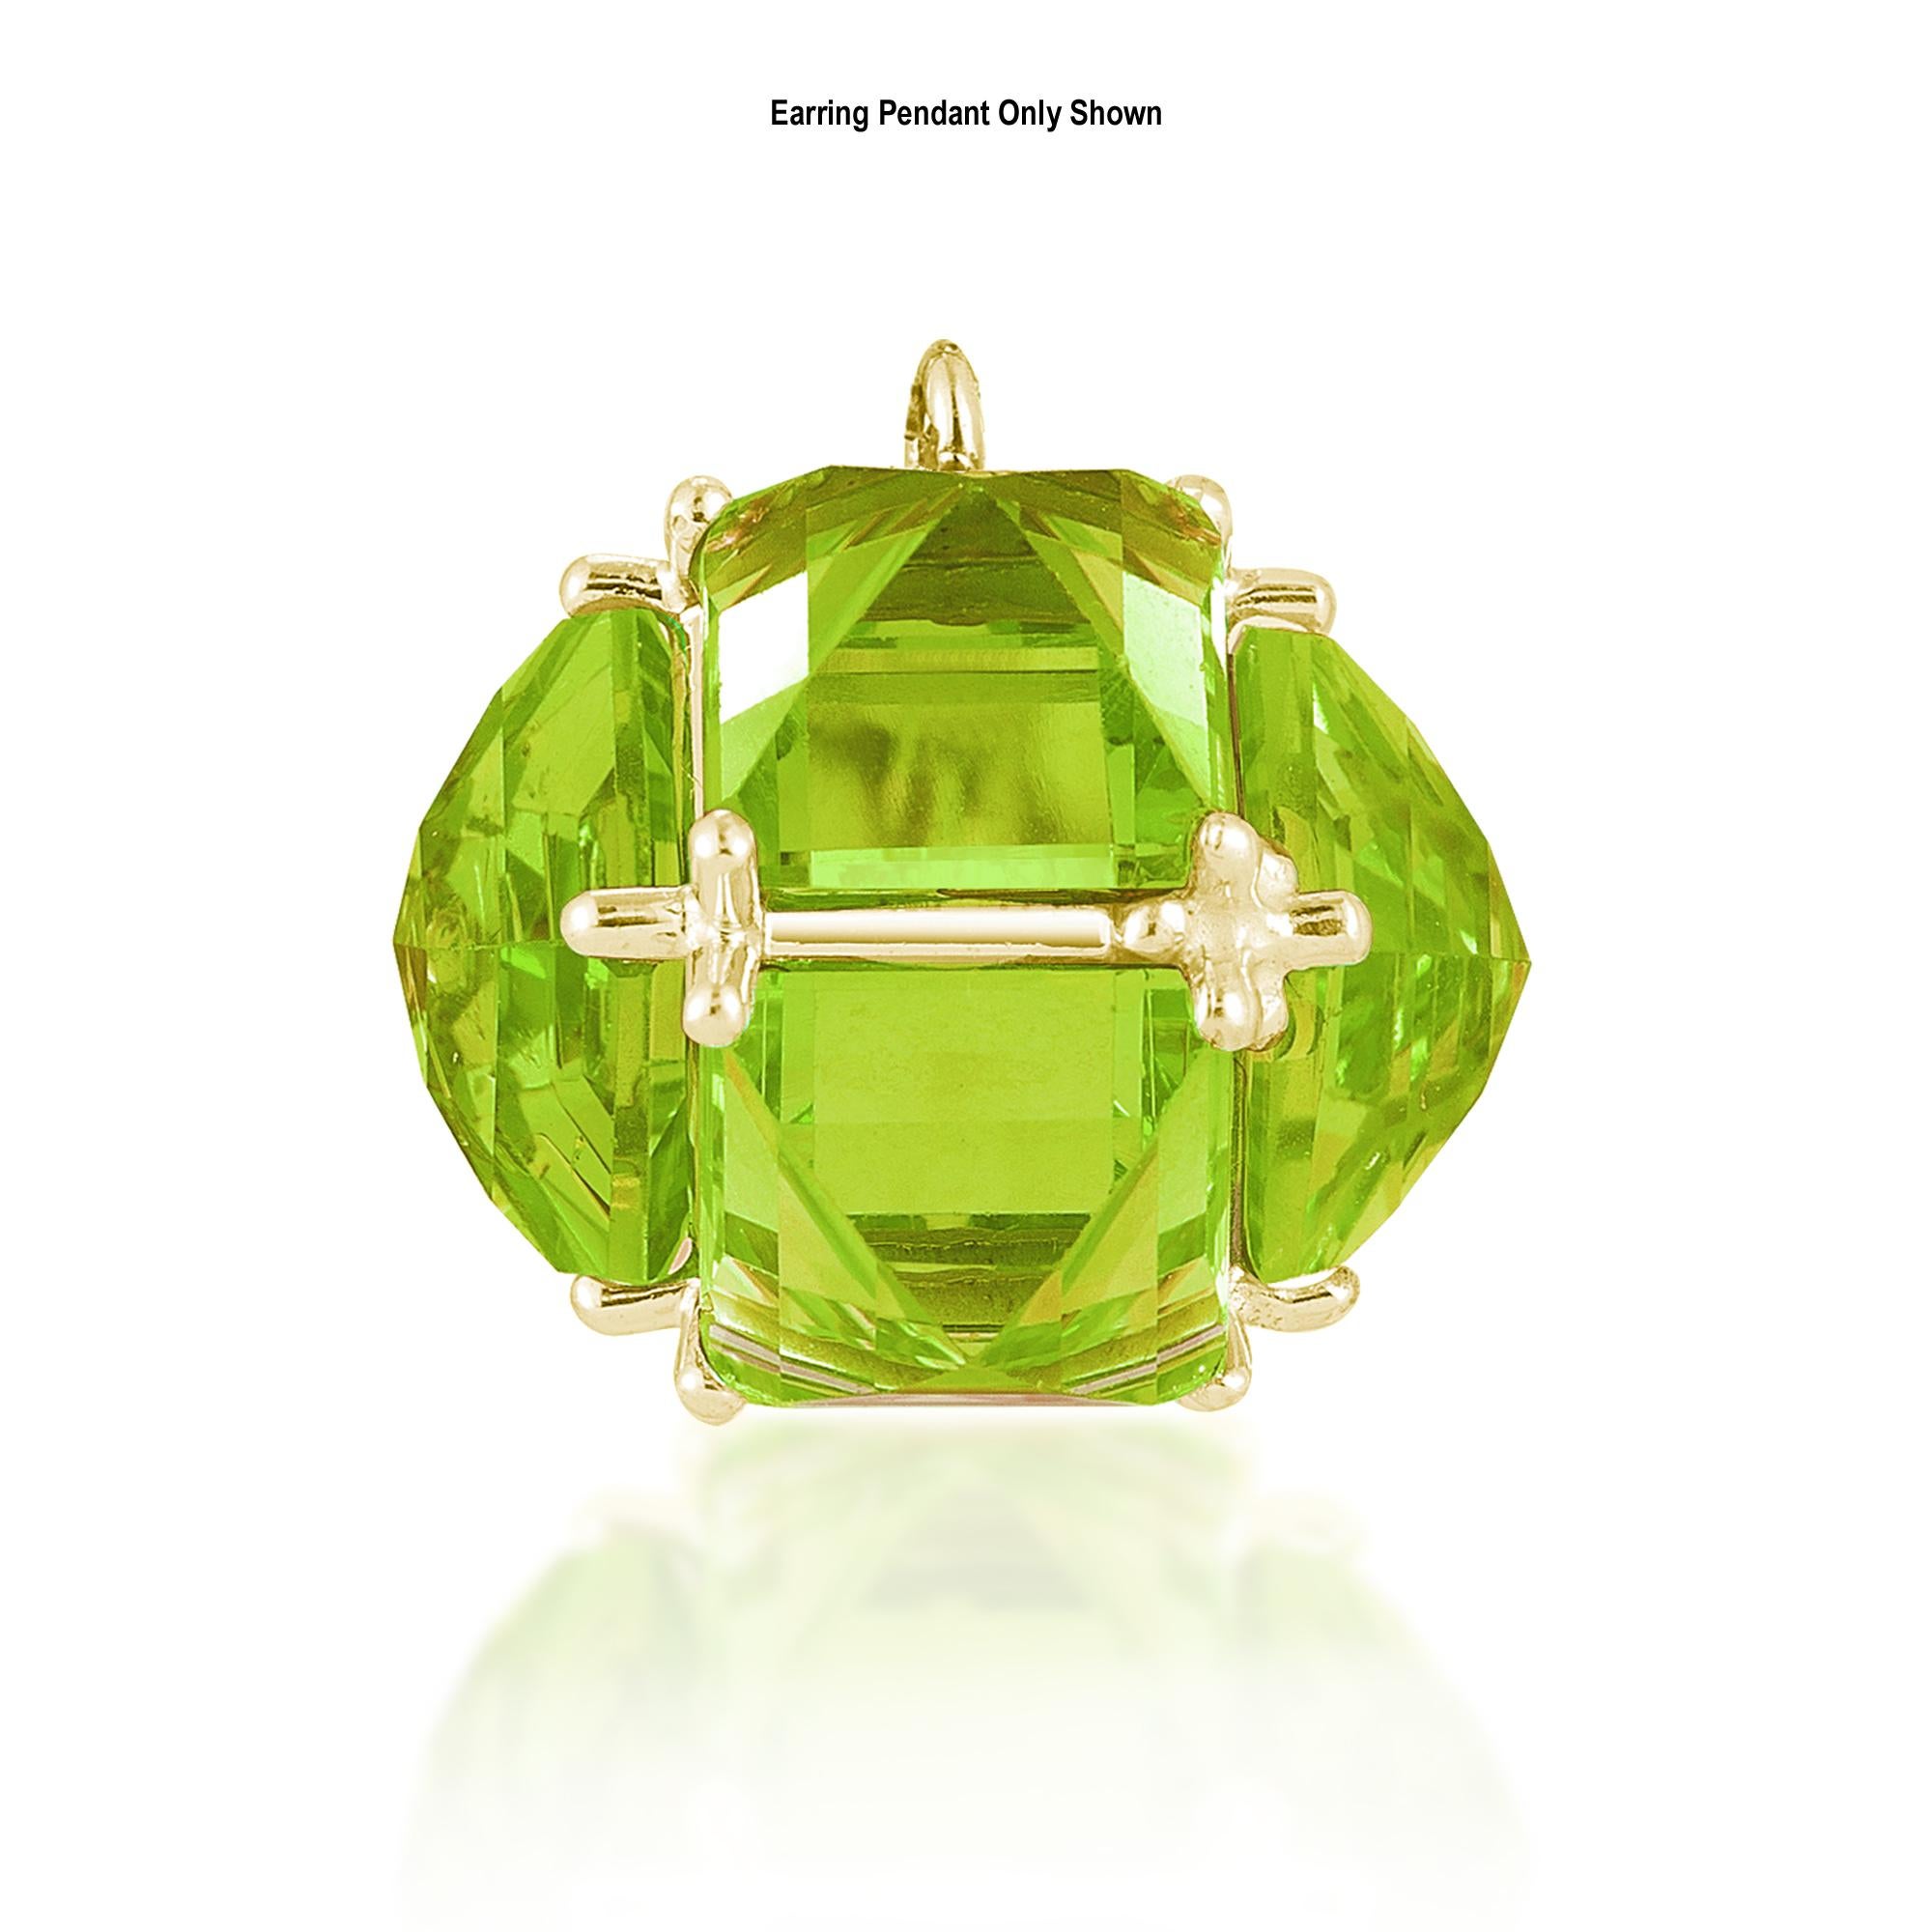 White sapphire earrings set in 18 karat yellow gold paired with reverse set emerald-cut peridot earring pendants from the Very PC®collection. 

Staying true to Paolo Costagli’s appreciation for modern and clean geometries, the Very PC® collection